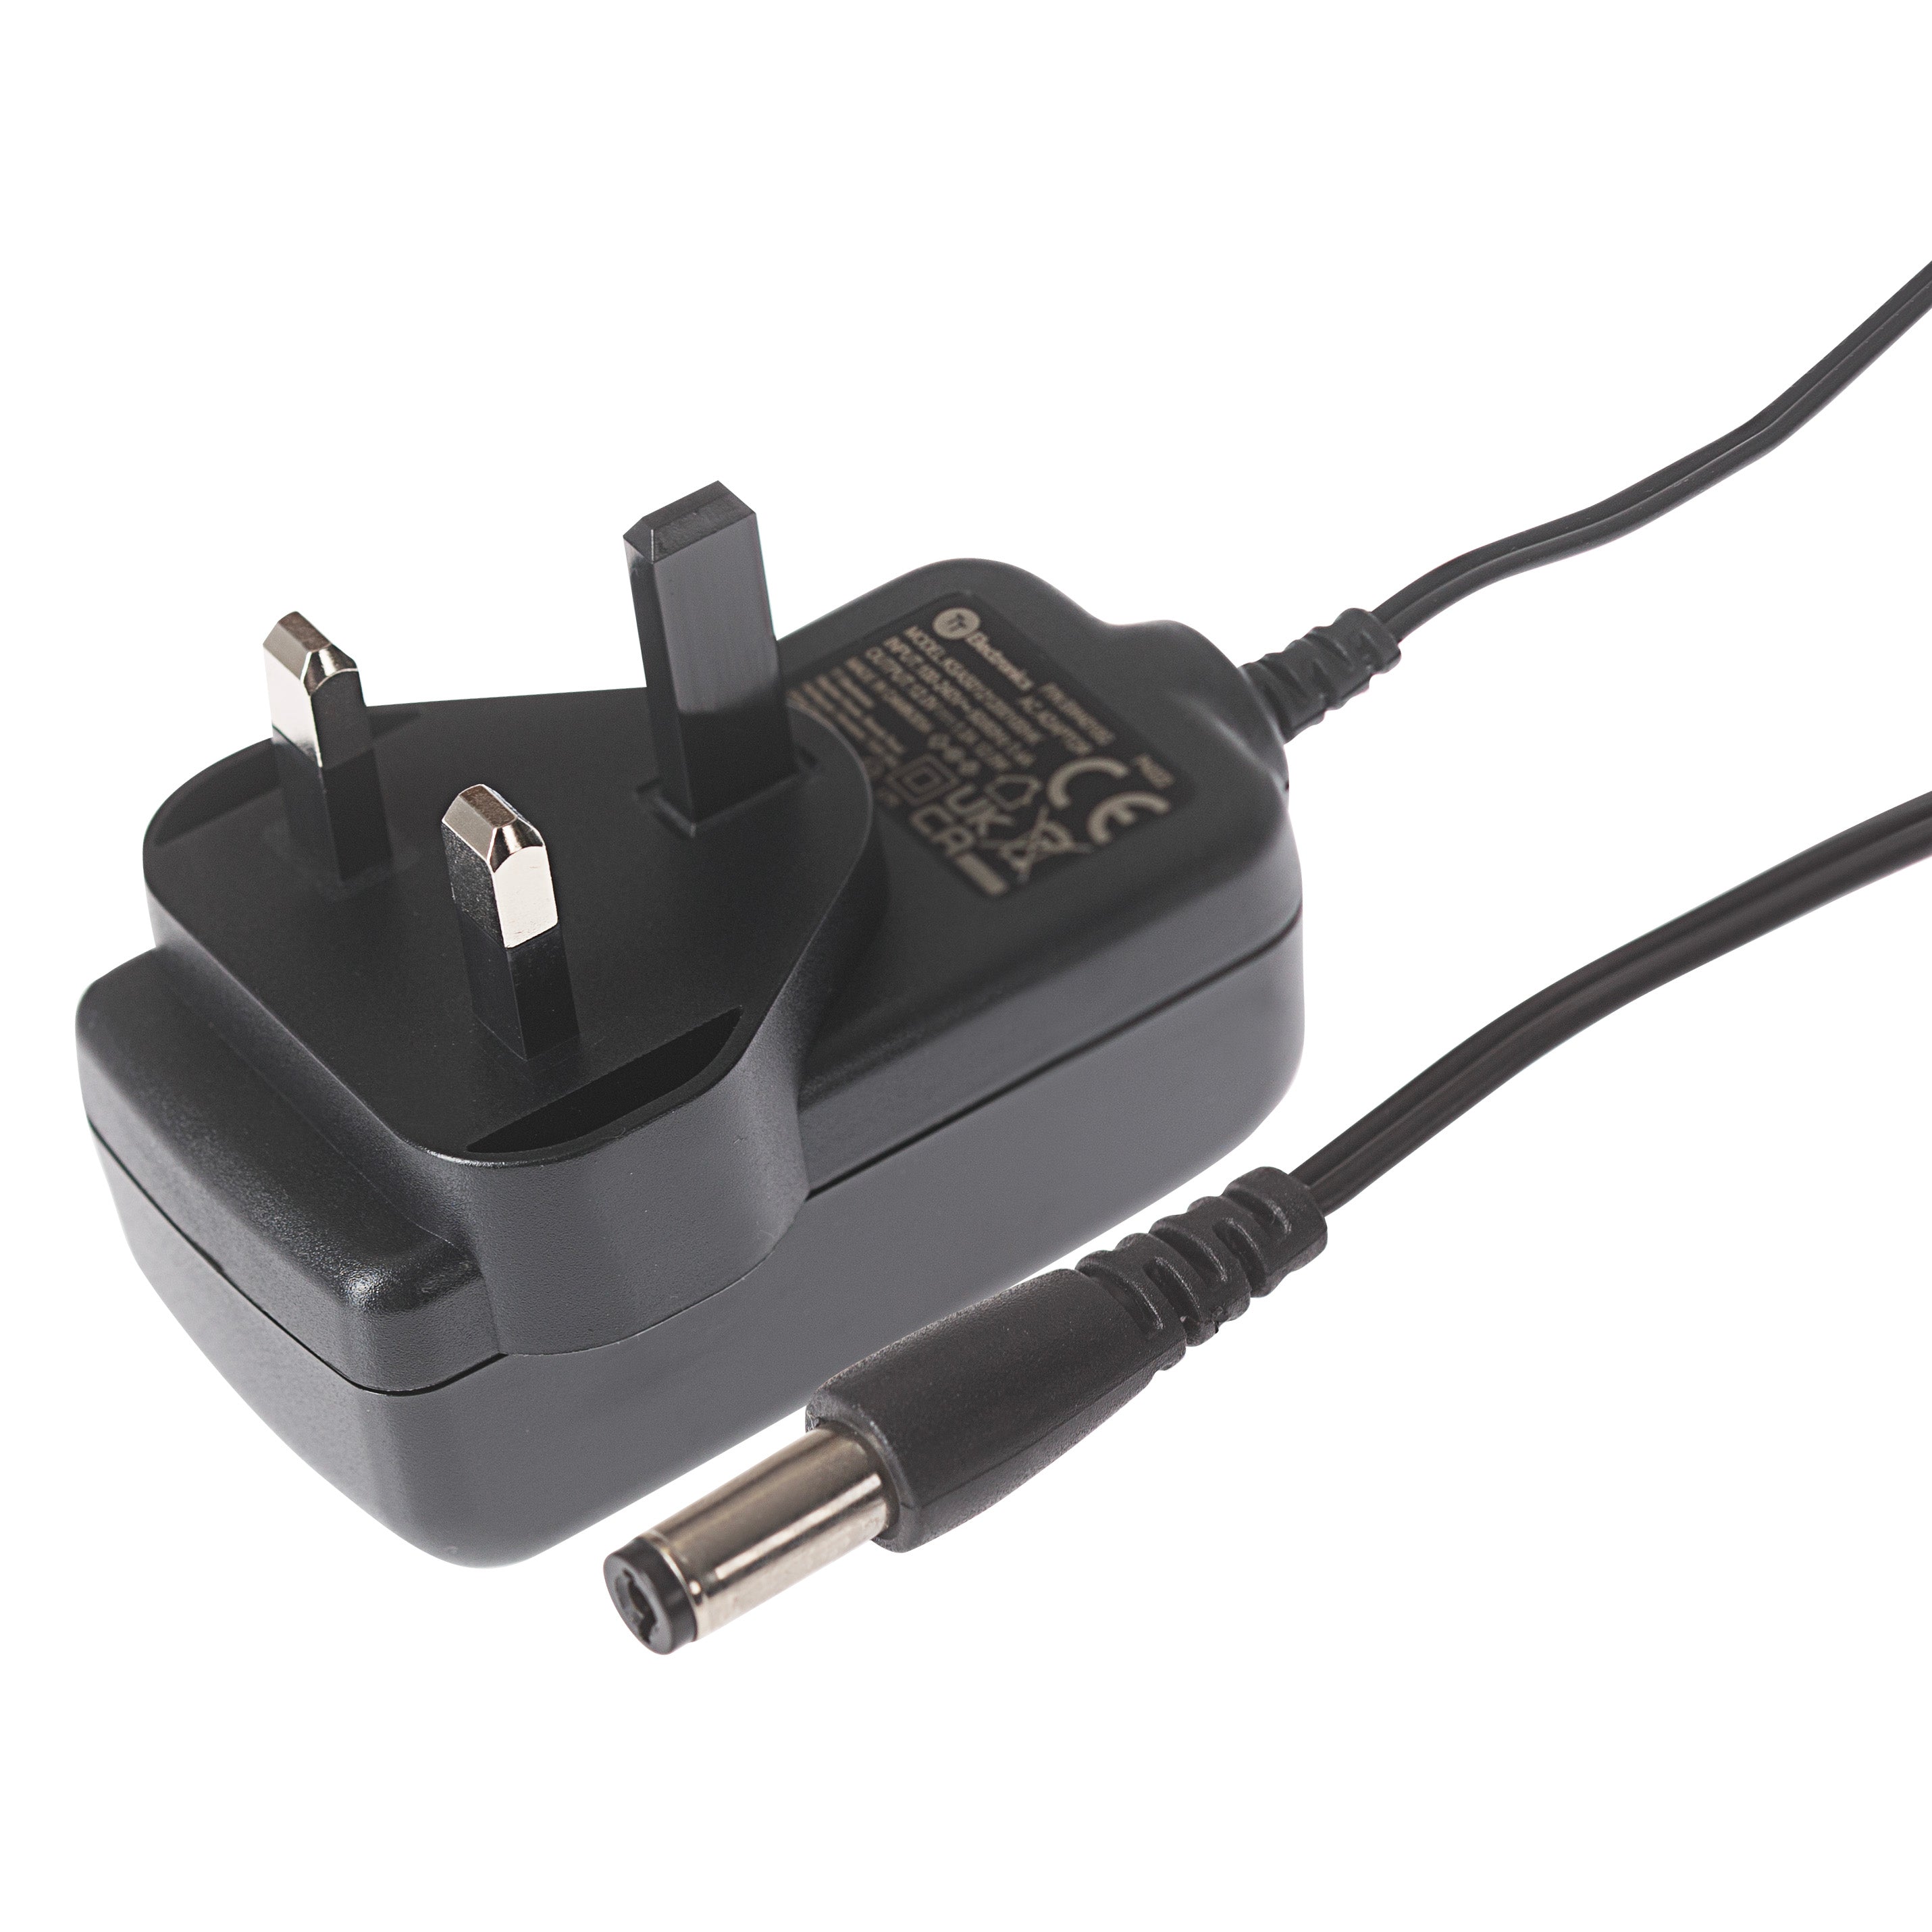 MPS Maplin UK Switching Power Supply 12V DC 1 Amp 12W 2.1 x 5.5 x 12mm Plug - 1.5m Cable